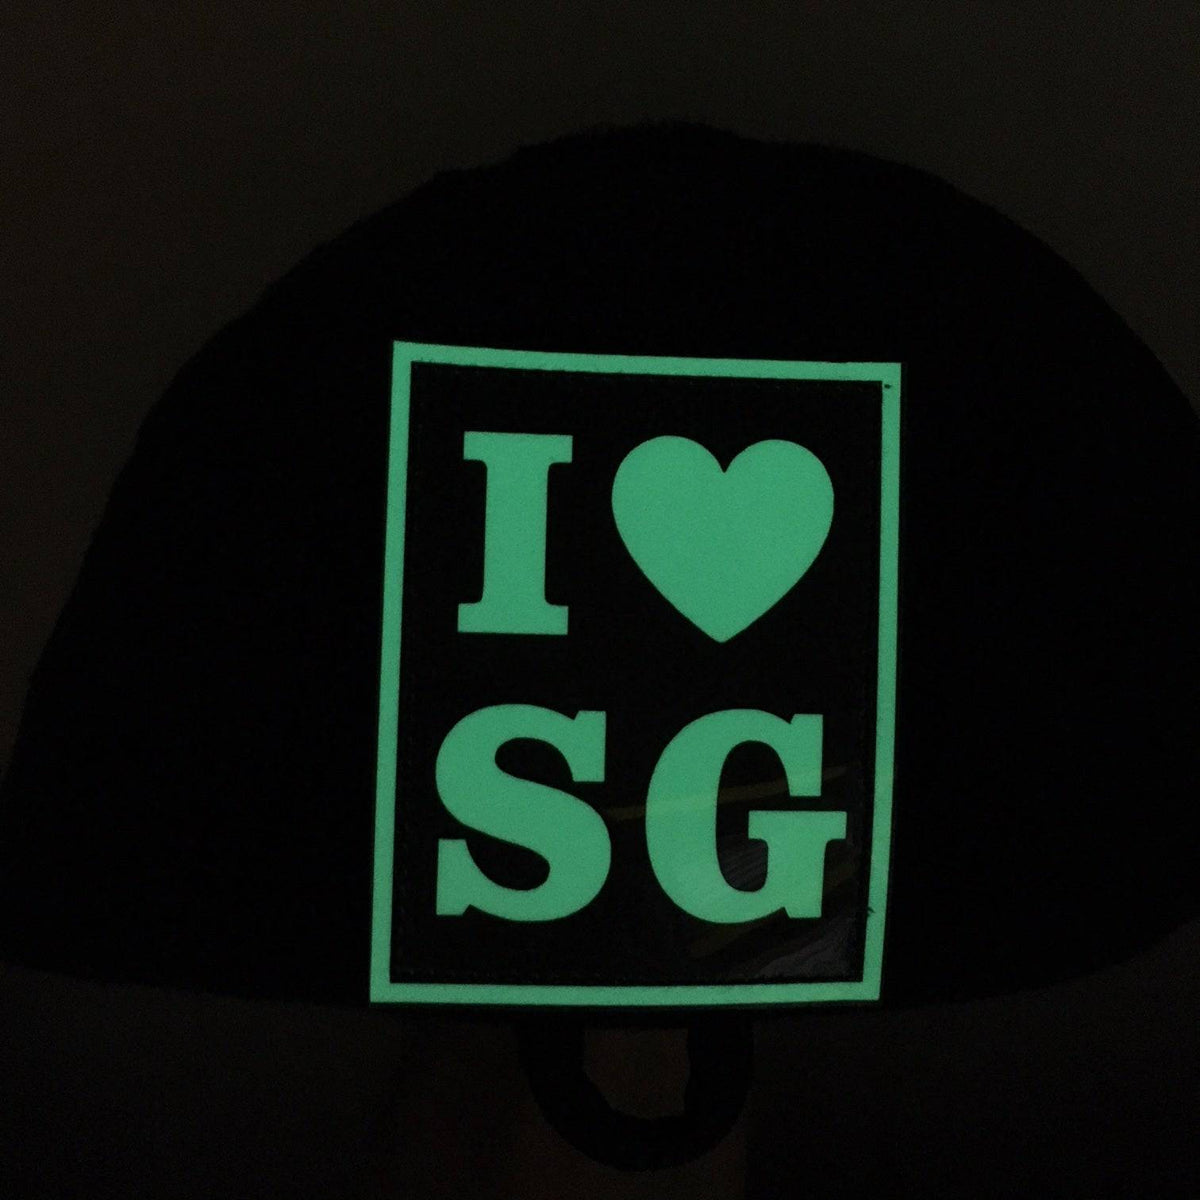 I LOVE SG PATCH - GLOW IN THE DARK - The Morale Patches